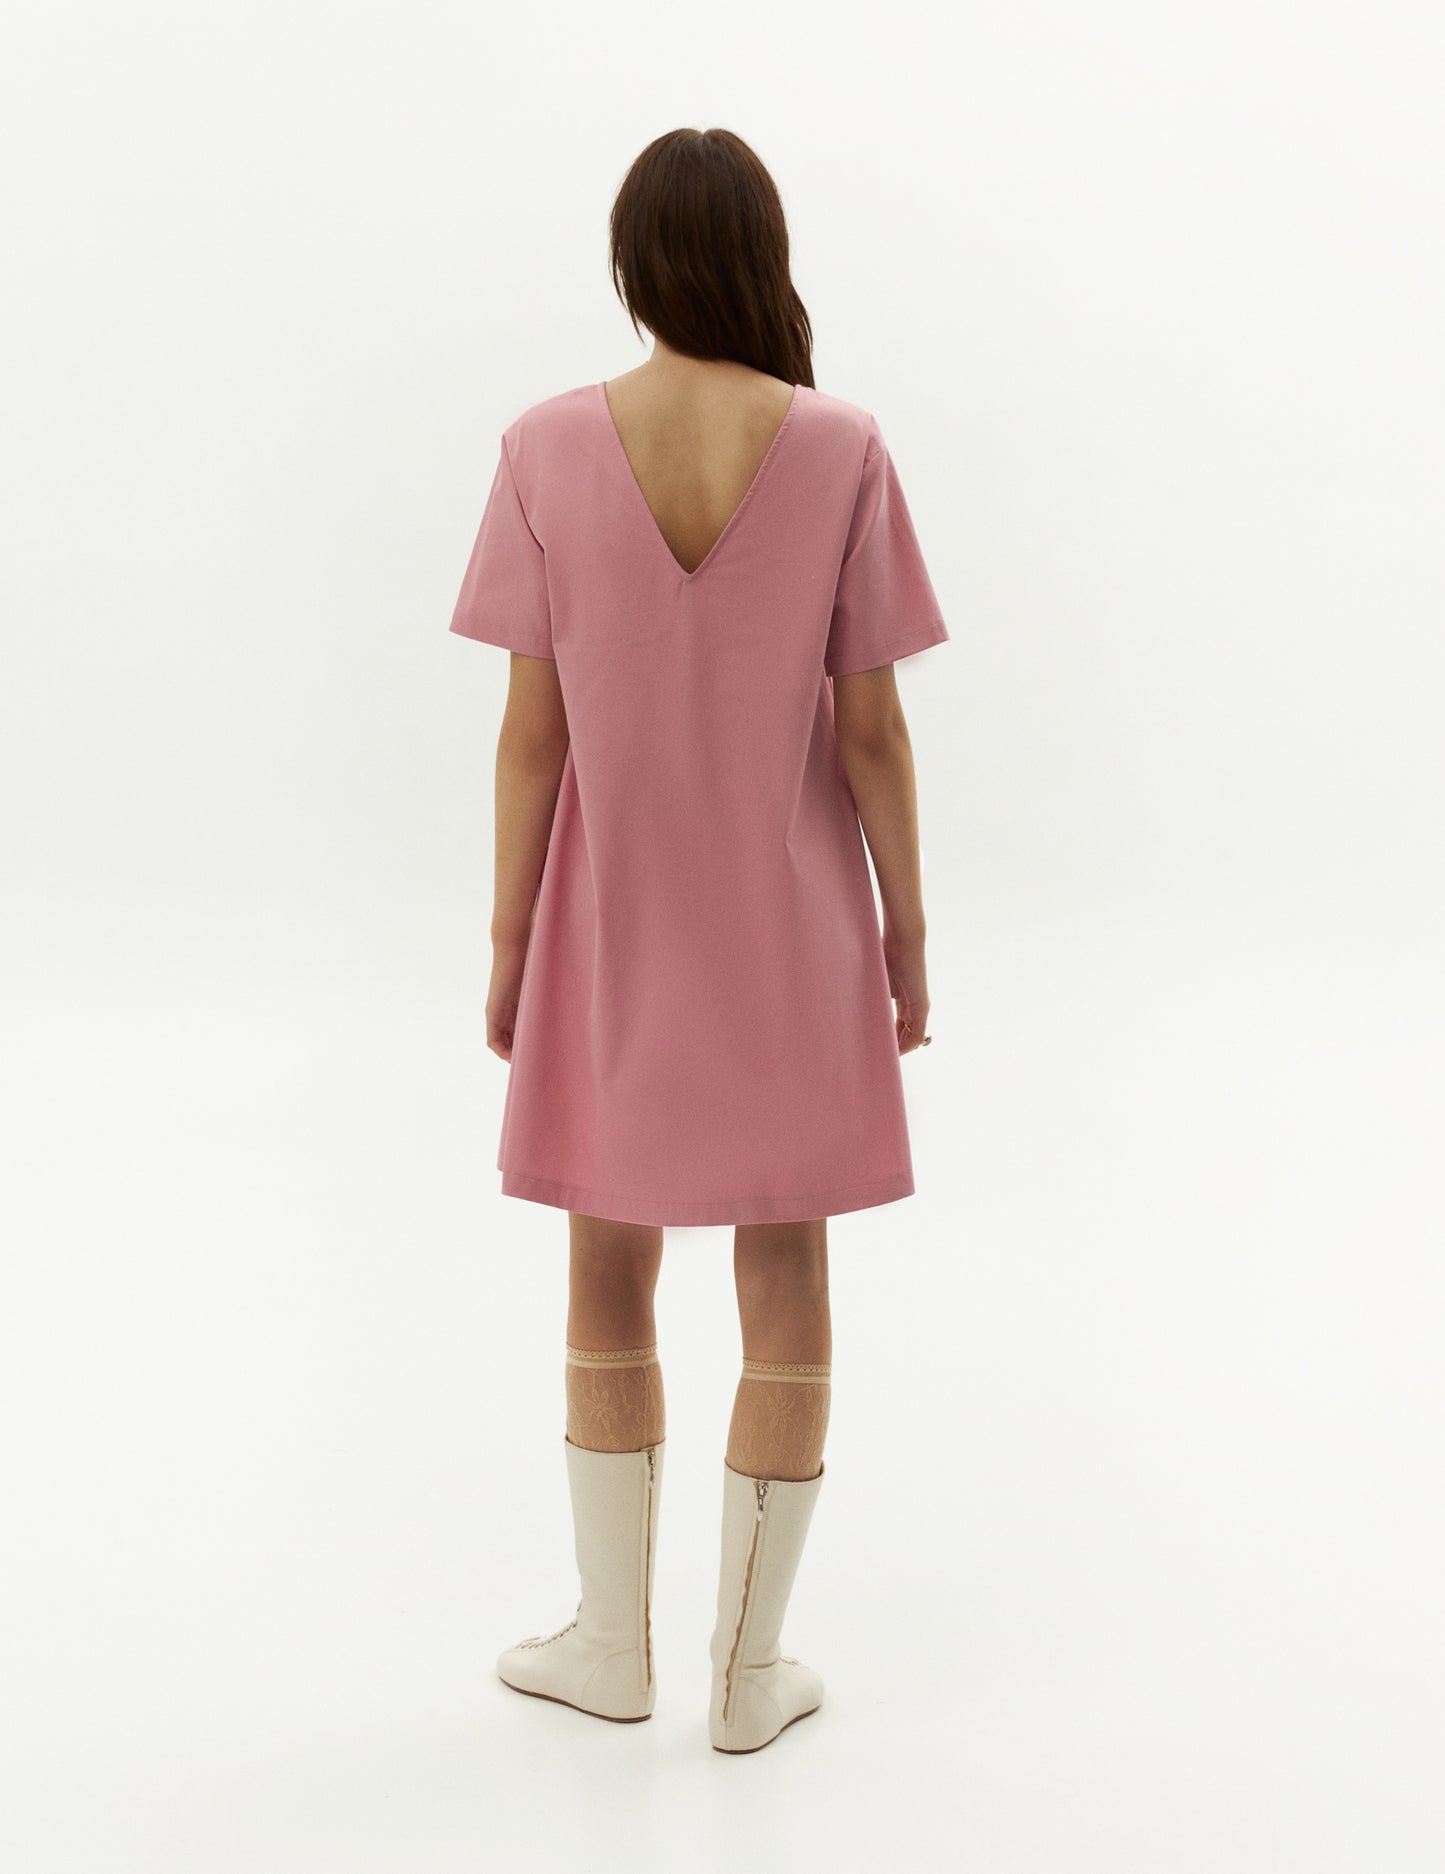 Day dress with open back in pink color. Everyday outfit. FORNA brand shop online